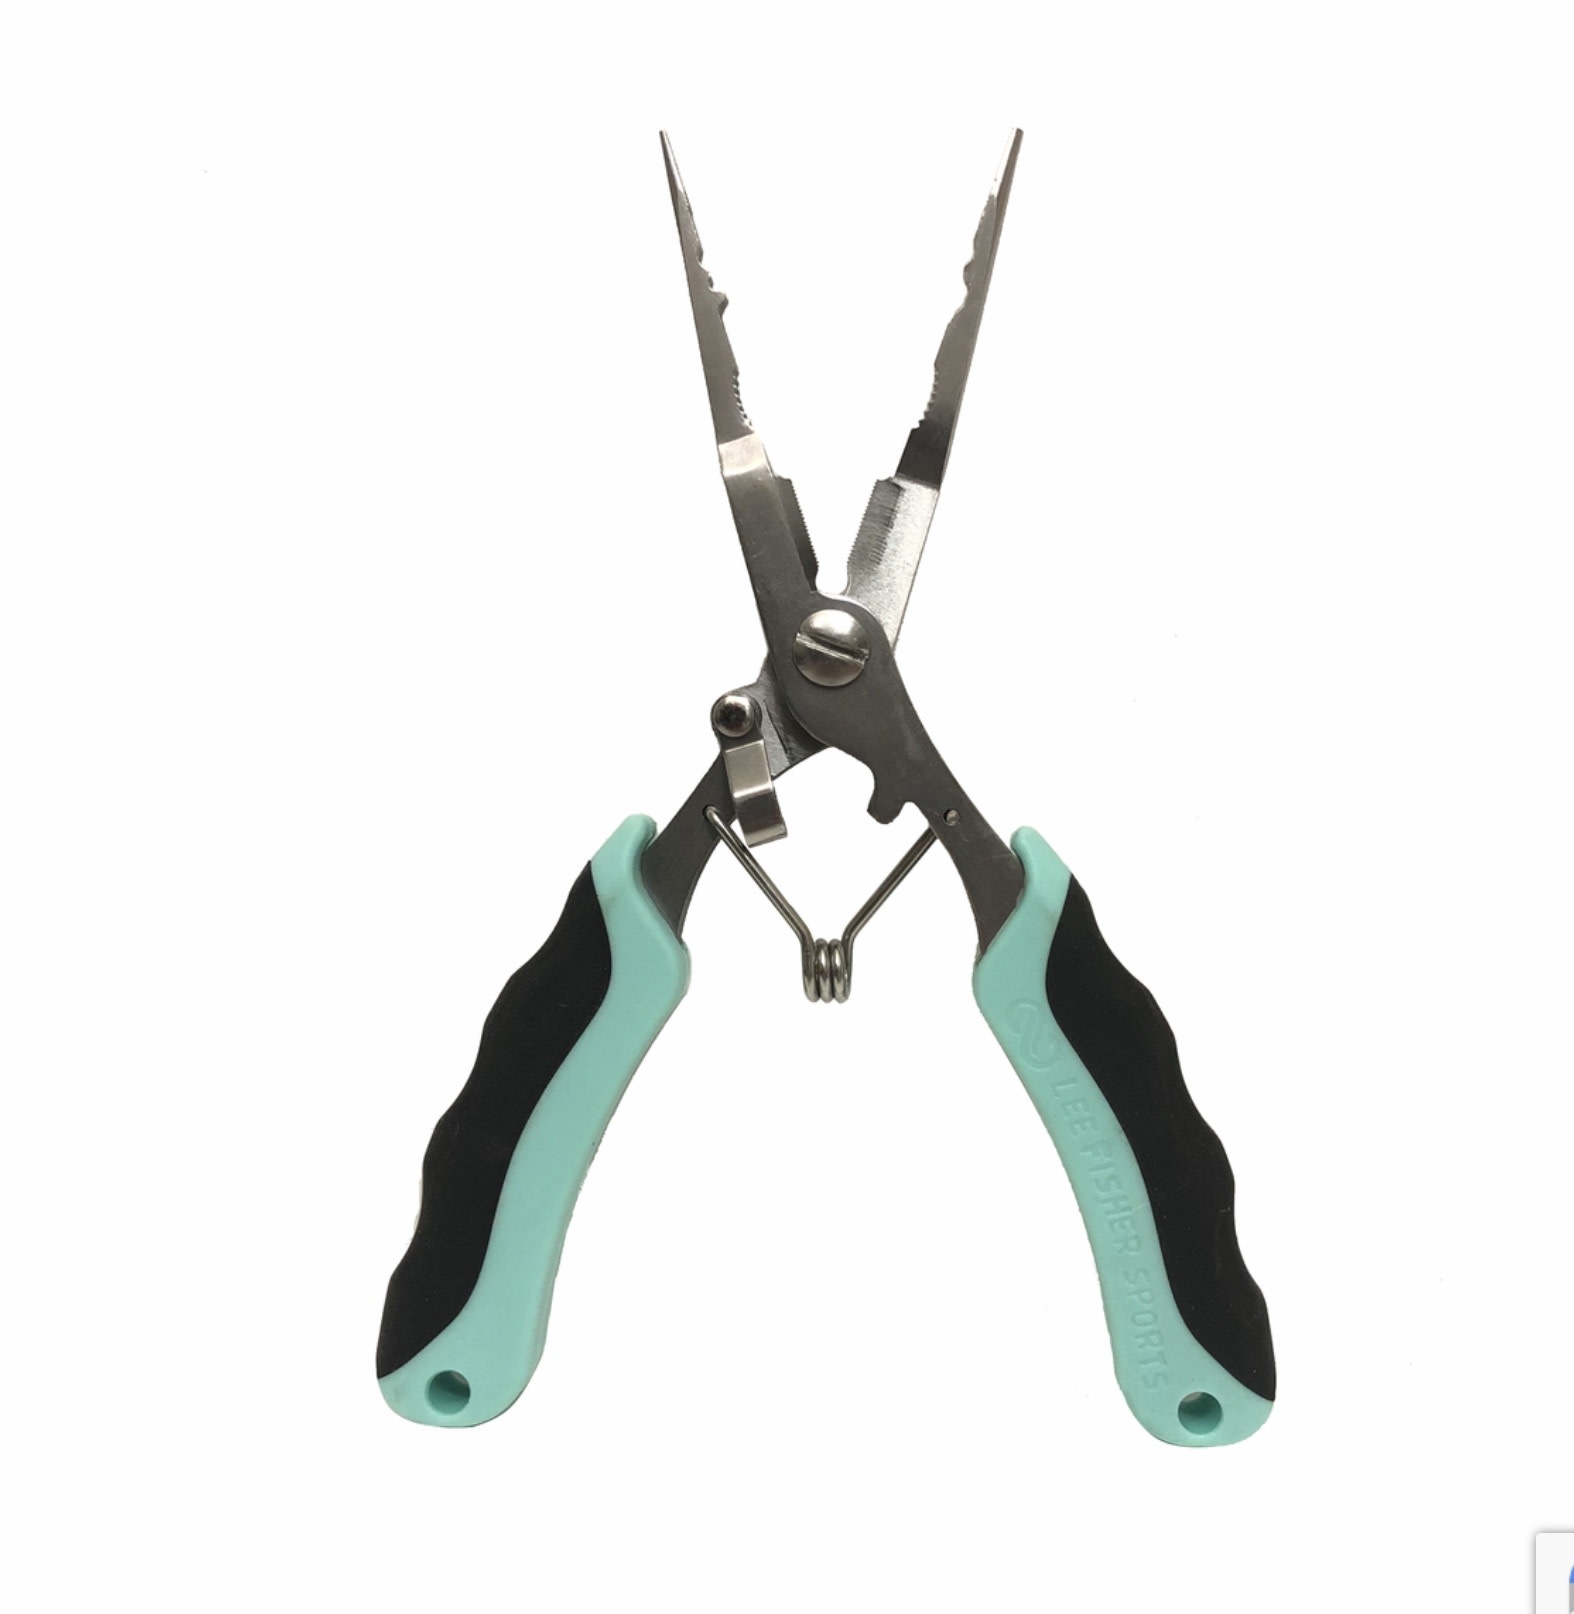 Lee Fisher Sports 6.5 Stainless Steel Fishing Multi-Use Pliers